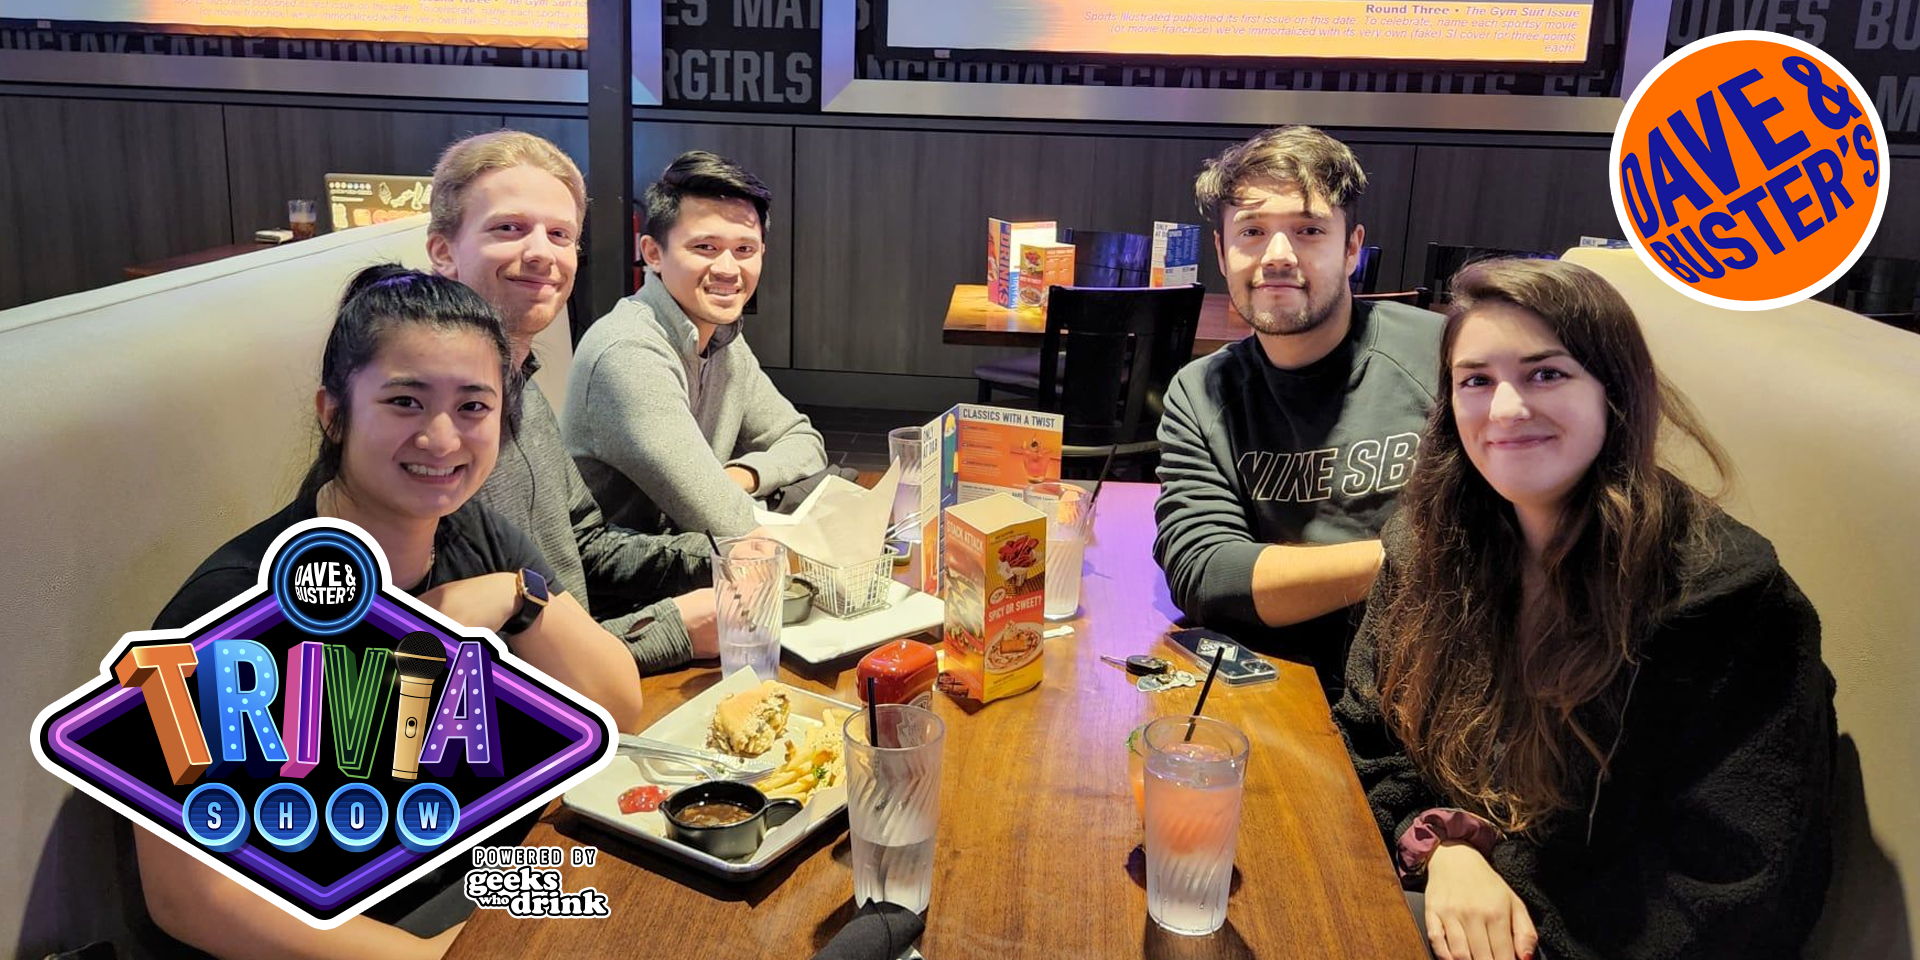 Geeks Who Drink Trivia Night at Dave and Buster's - Philadelphia promotional image